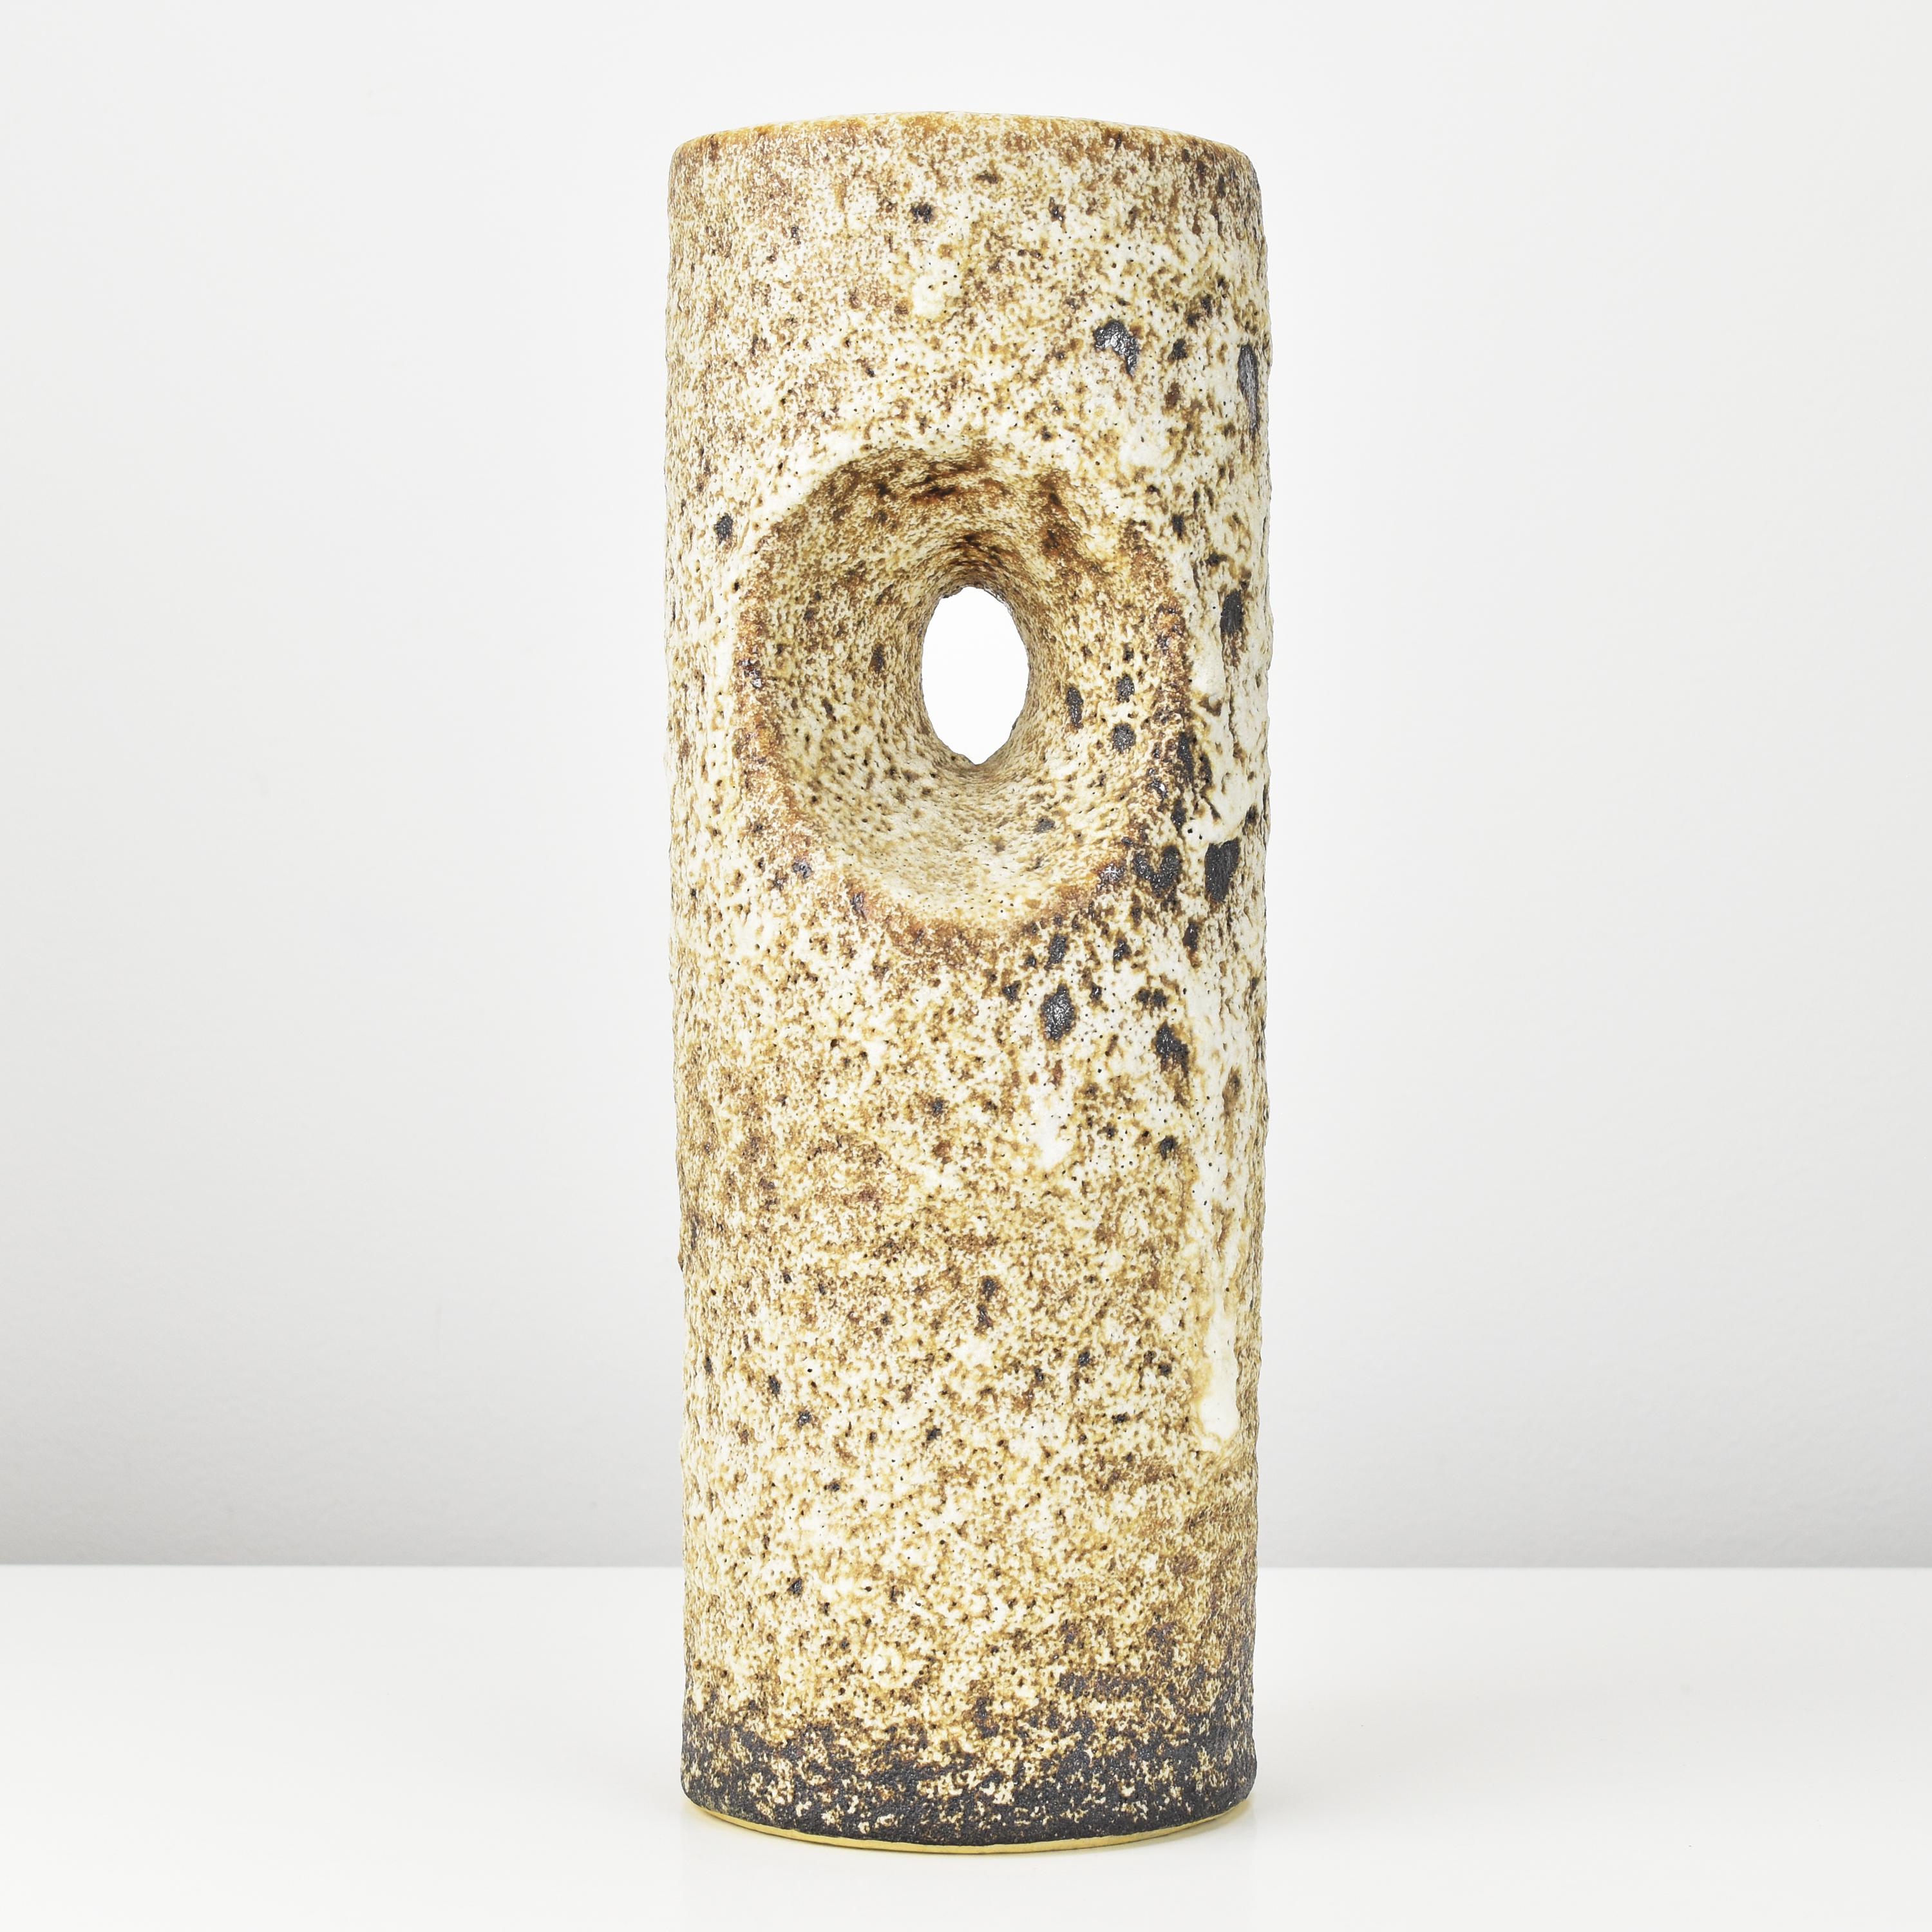 This Mid Century ceramic vase is a stunning piece from the 1960s, featuring a distinctive beige-brown Fat Lava glaze. Its most notable feature is the unique opening in the body, which not only sets it apart as a true work of art but also serves as a